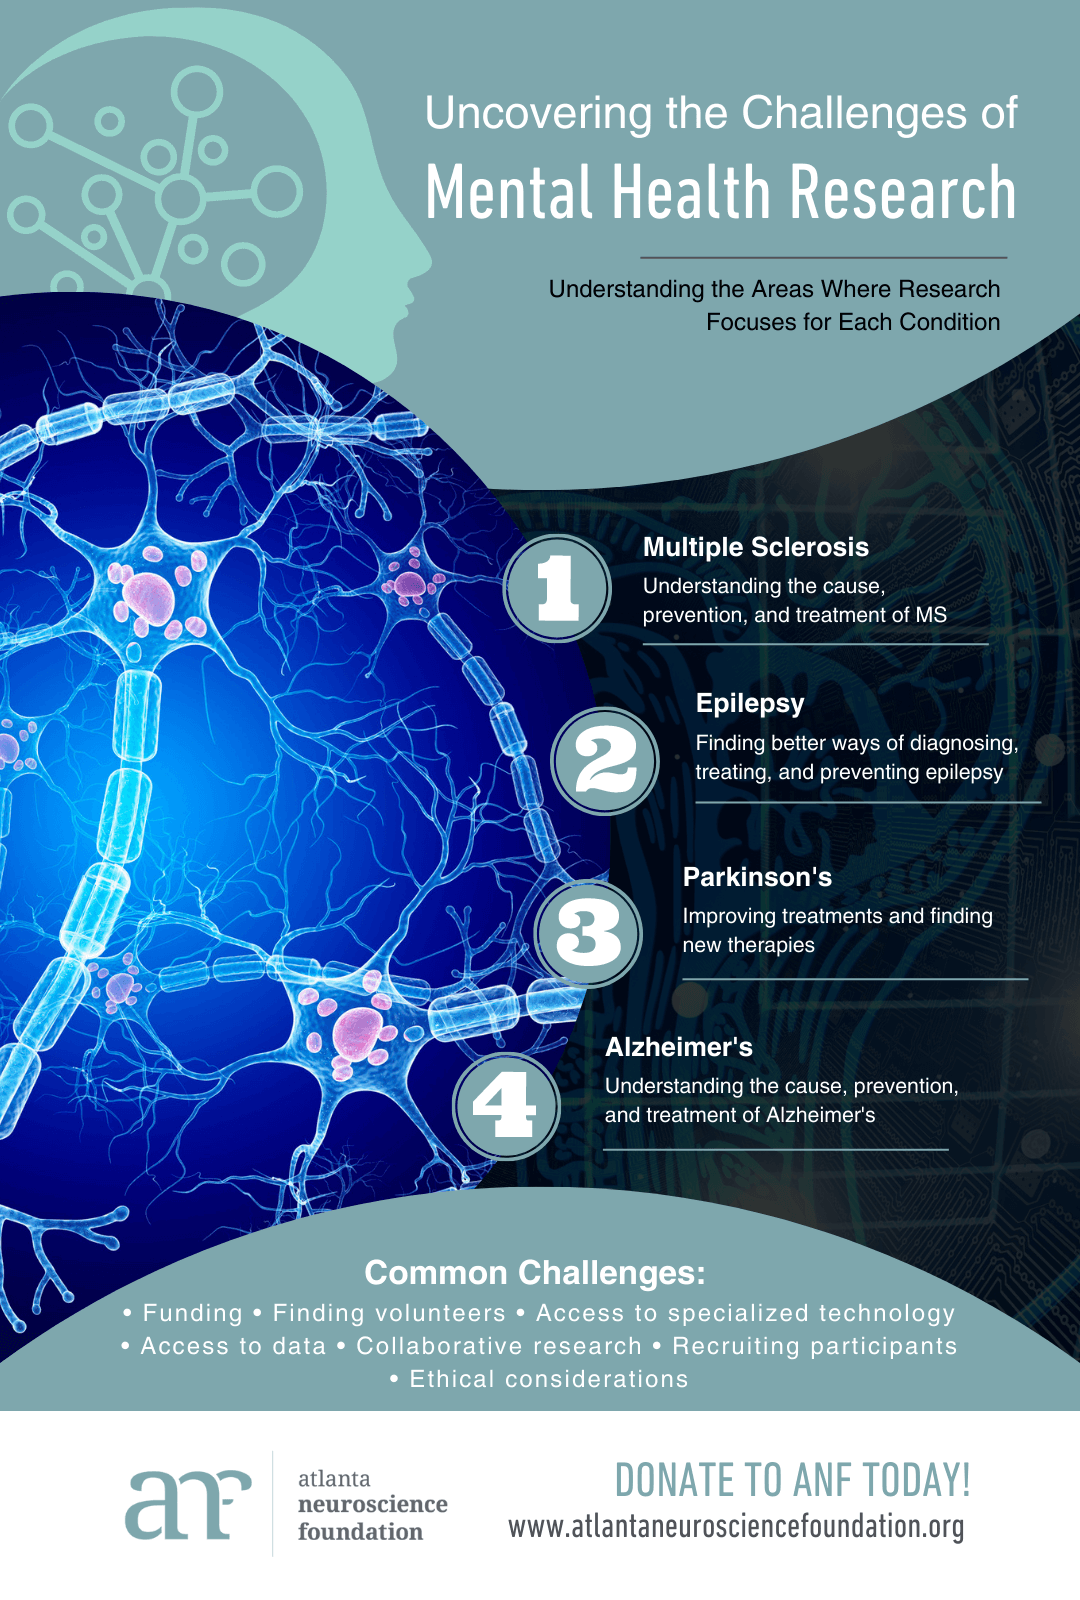 Uncovering the Challenges of Mental Health Research infographic